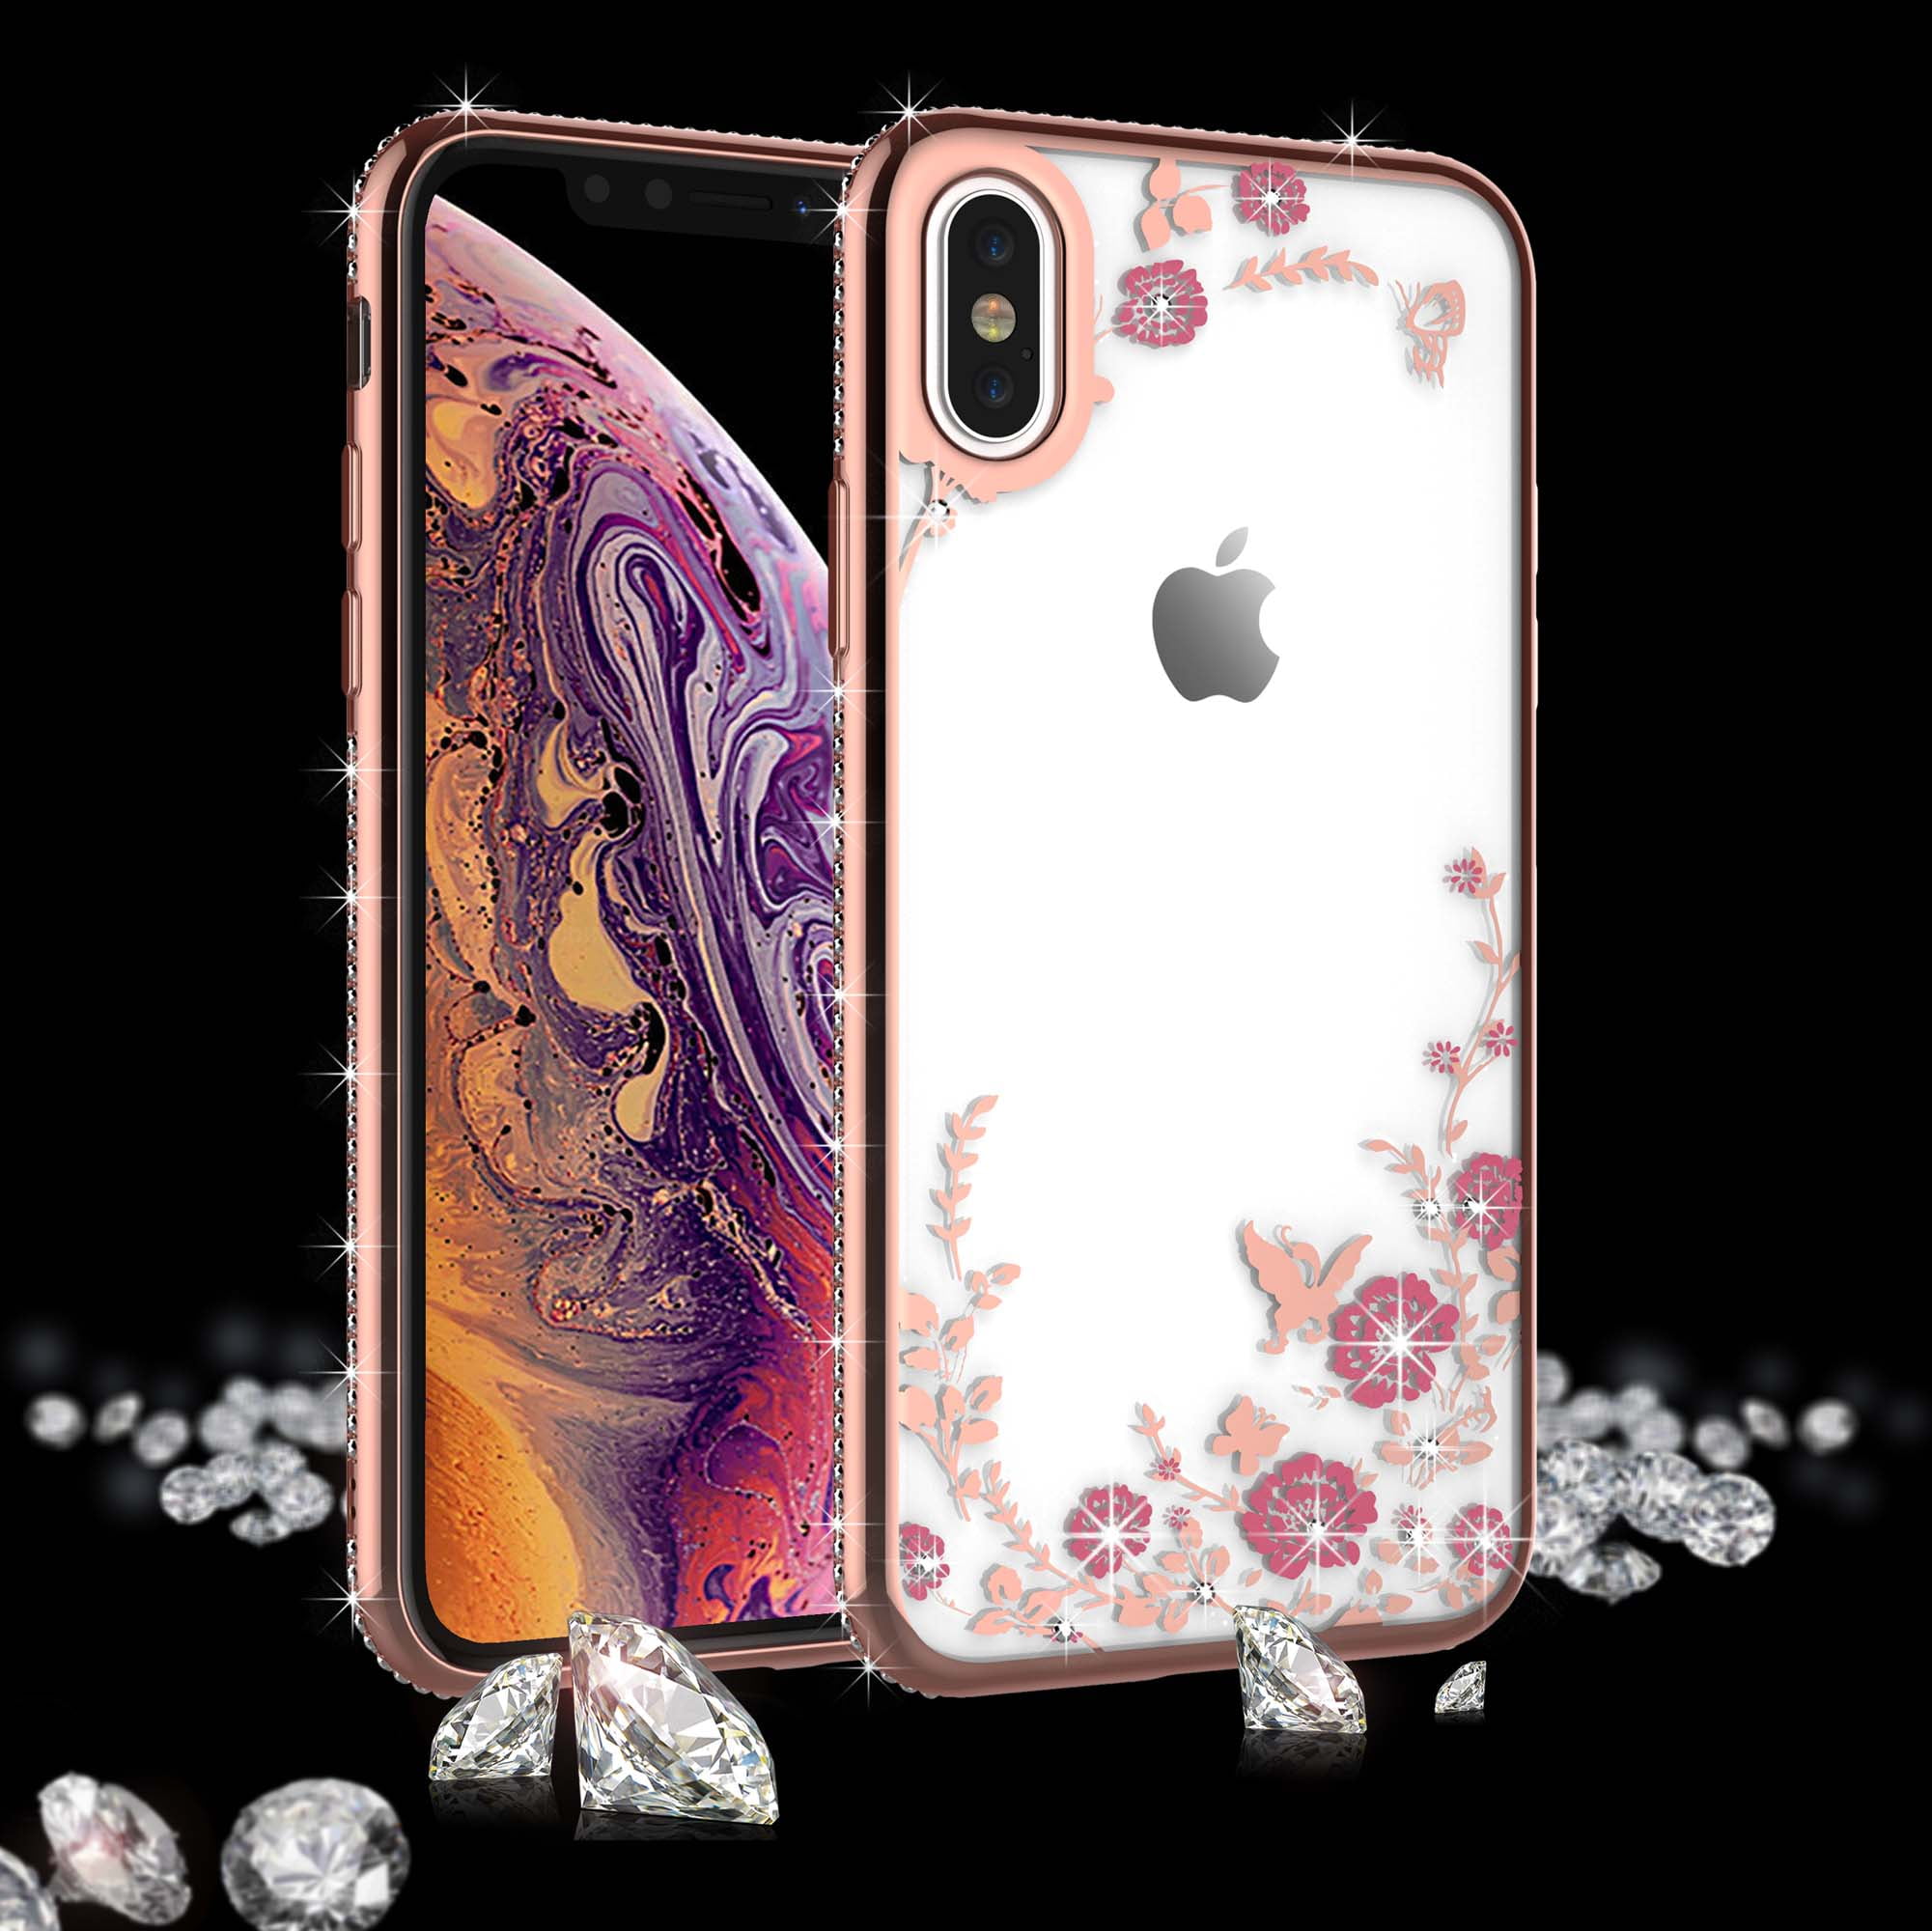 iPhone XS Max Case, Clear Case For iPhone XS Max, Njjex Ultra Clear hybrid Floral Printed Flower Sparkle Glitter Soft TPU Bumper Cases Cover For iPhone XS Max 2018